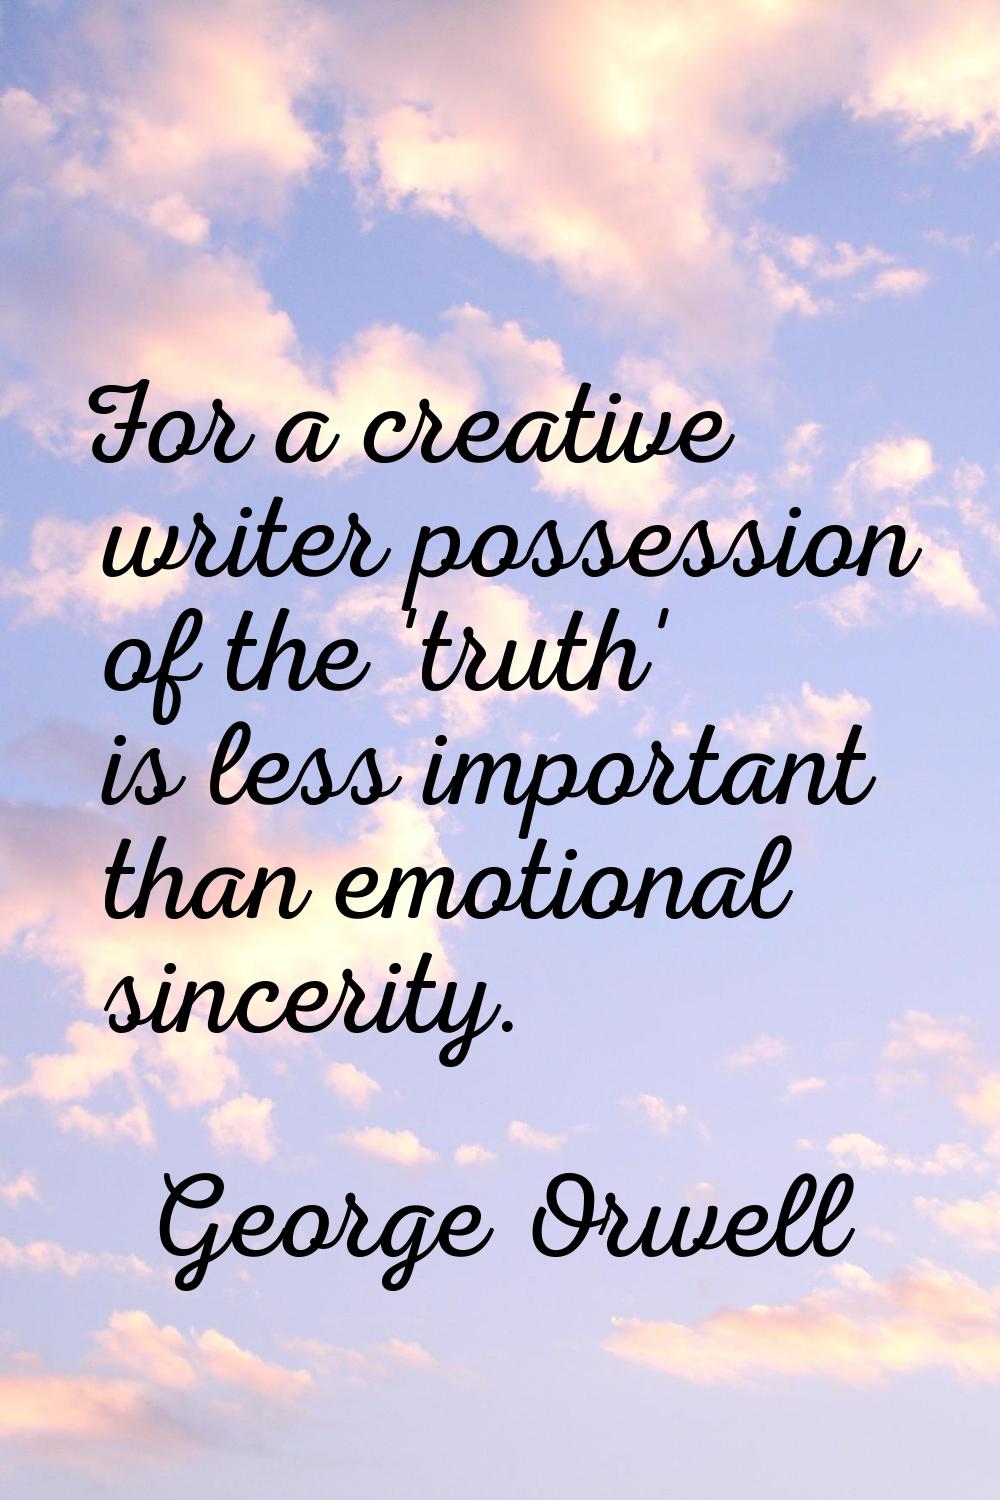 For a creative writer possession of the 'truth' is less important than emotional sincerity.